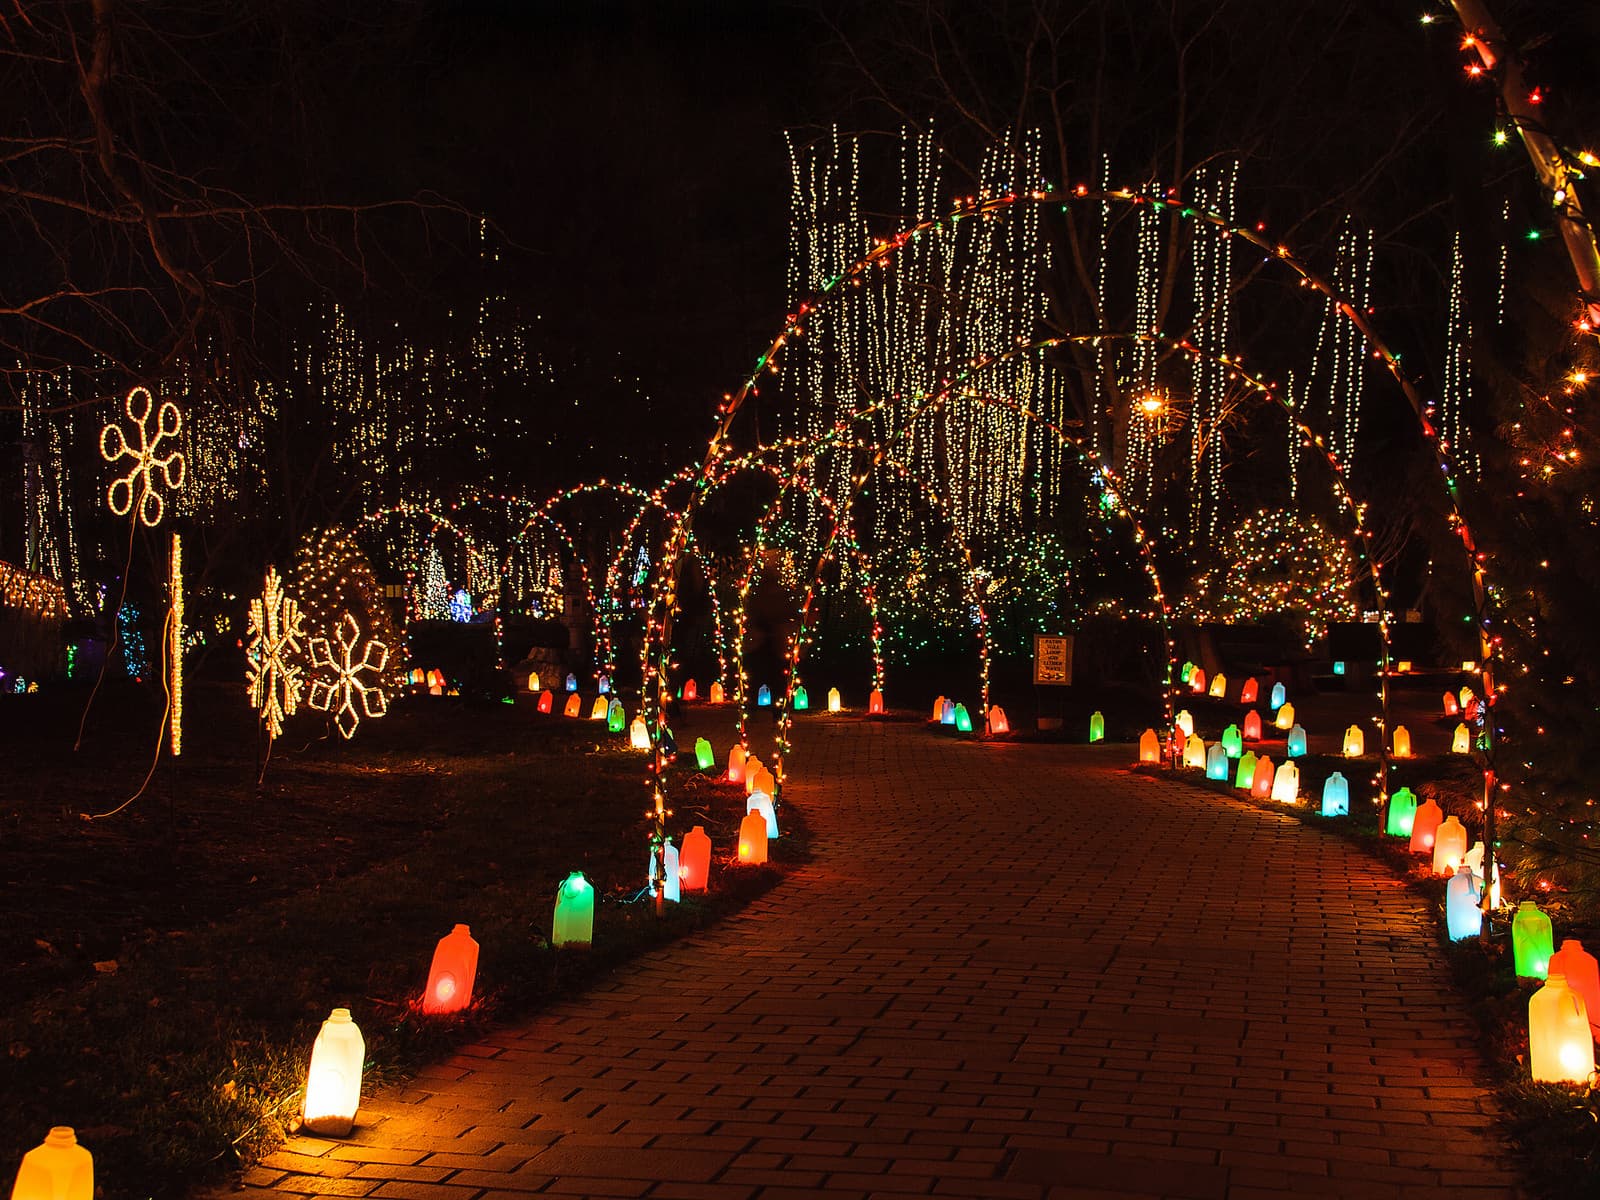 A walkway lit up with thousands of holiday lights